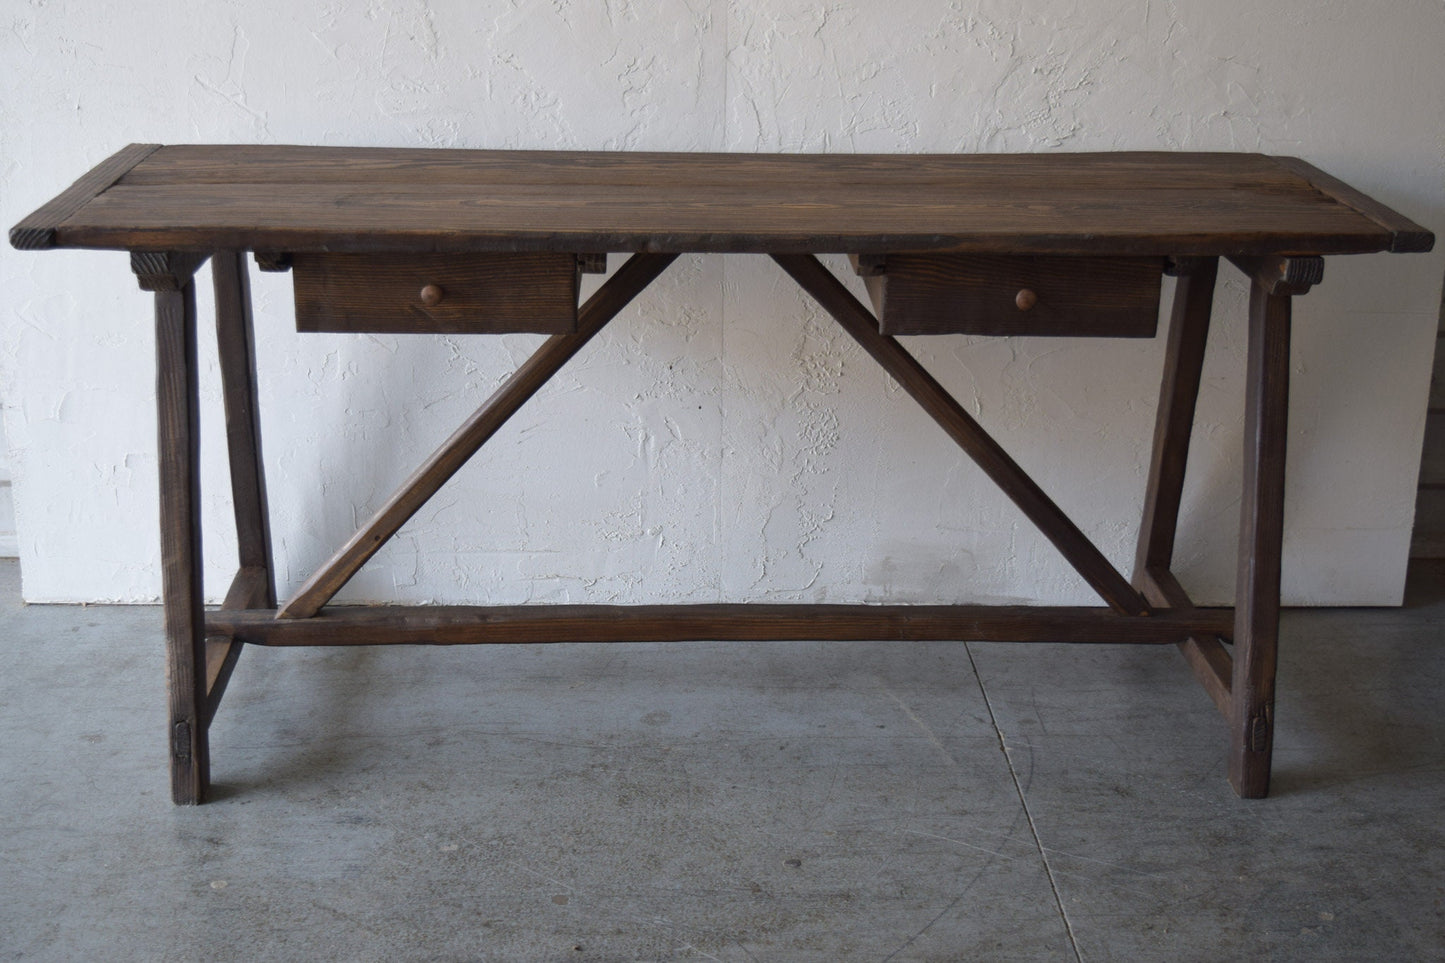 Very Large Oversized Entry Table Console Table Antique Inspired 75" Long